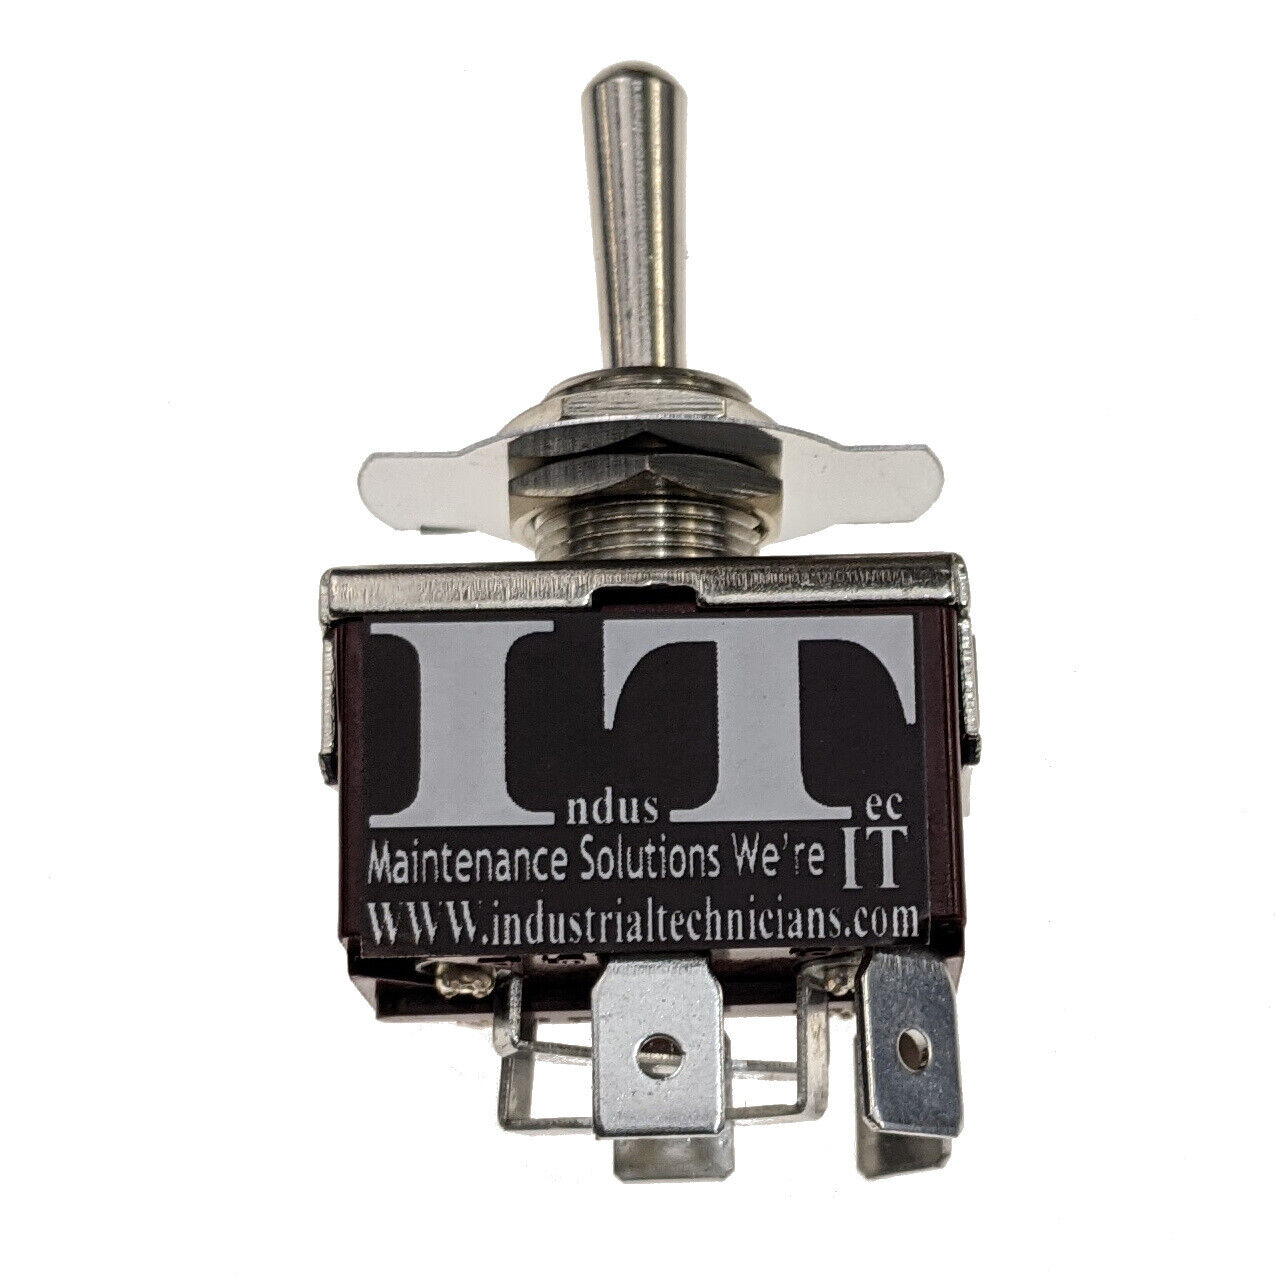 IndusTec 20 A Motor Polarity - Reversing Momentary Toggle Switch W Jumpers 3 pos